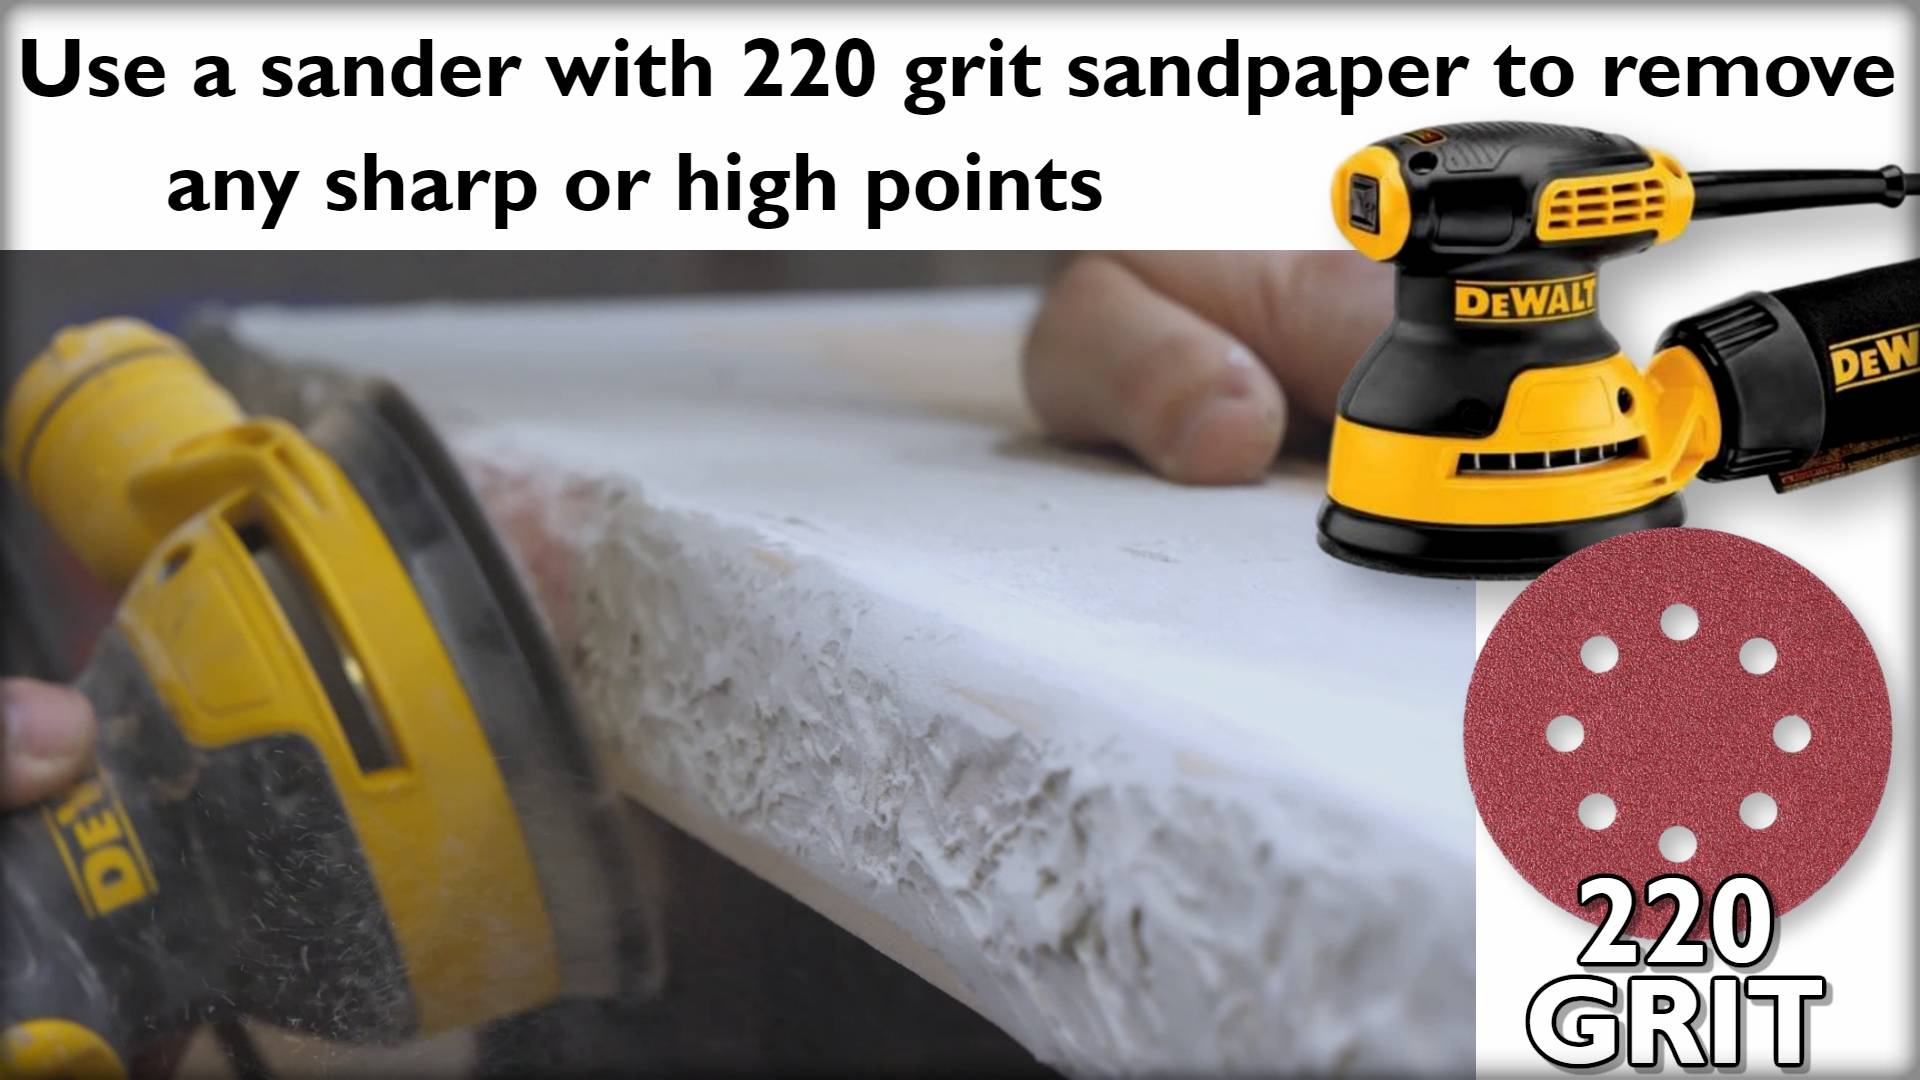 Use a sander with 220 grit sandpaper to remove any sharp or high points.